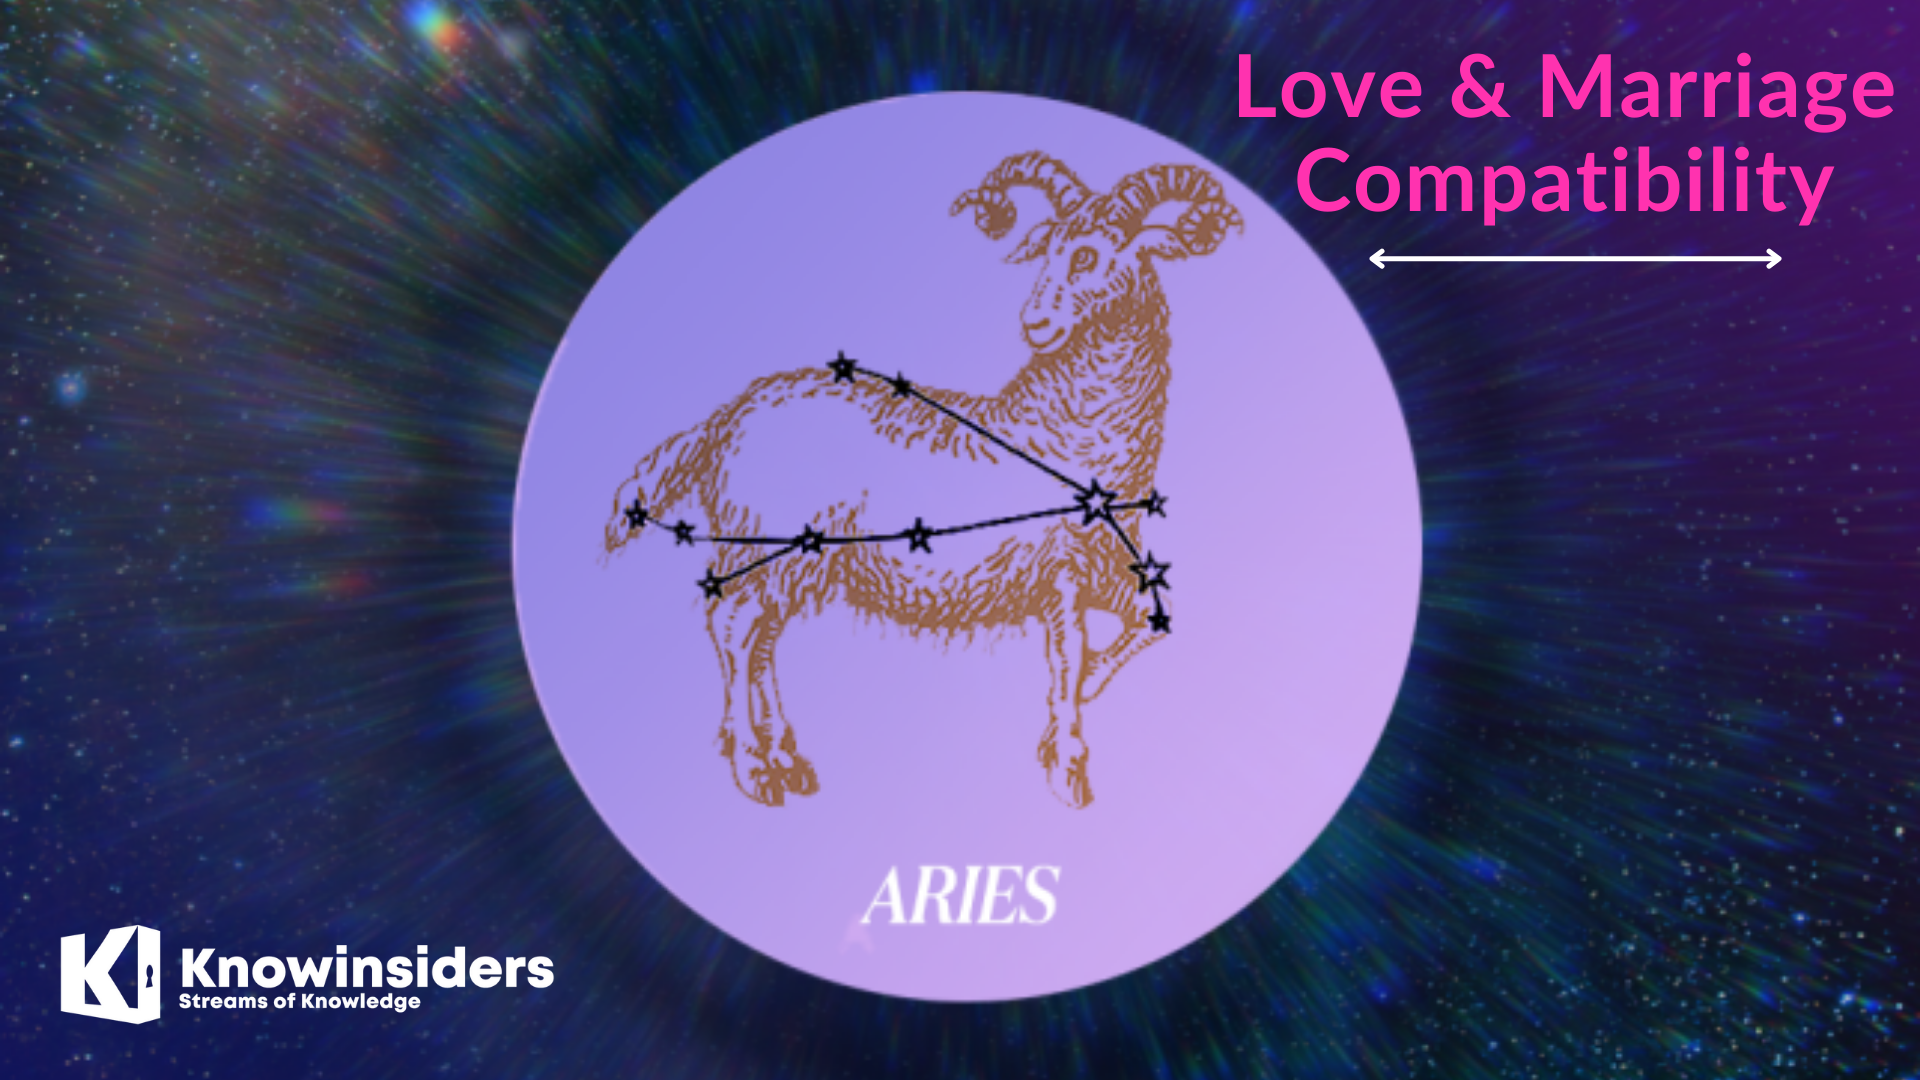 ARIES - Most Compatible Zodiac Signs for Love & Marriage